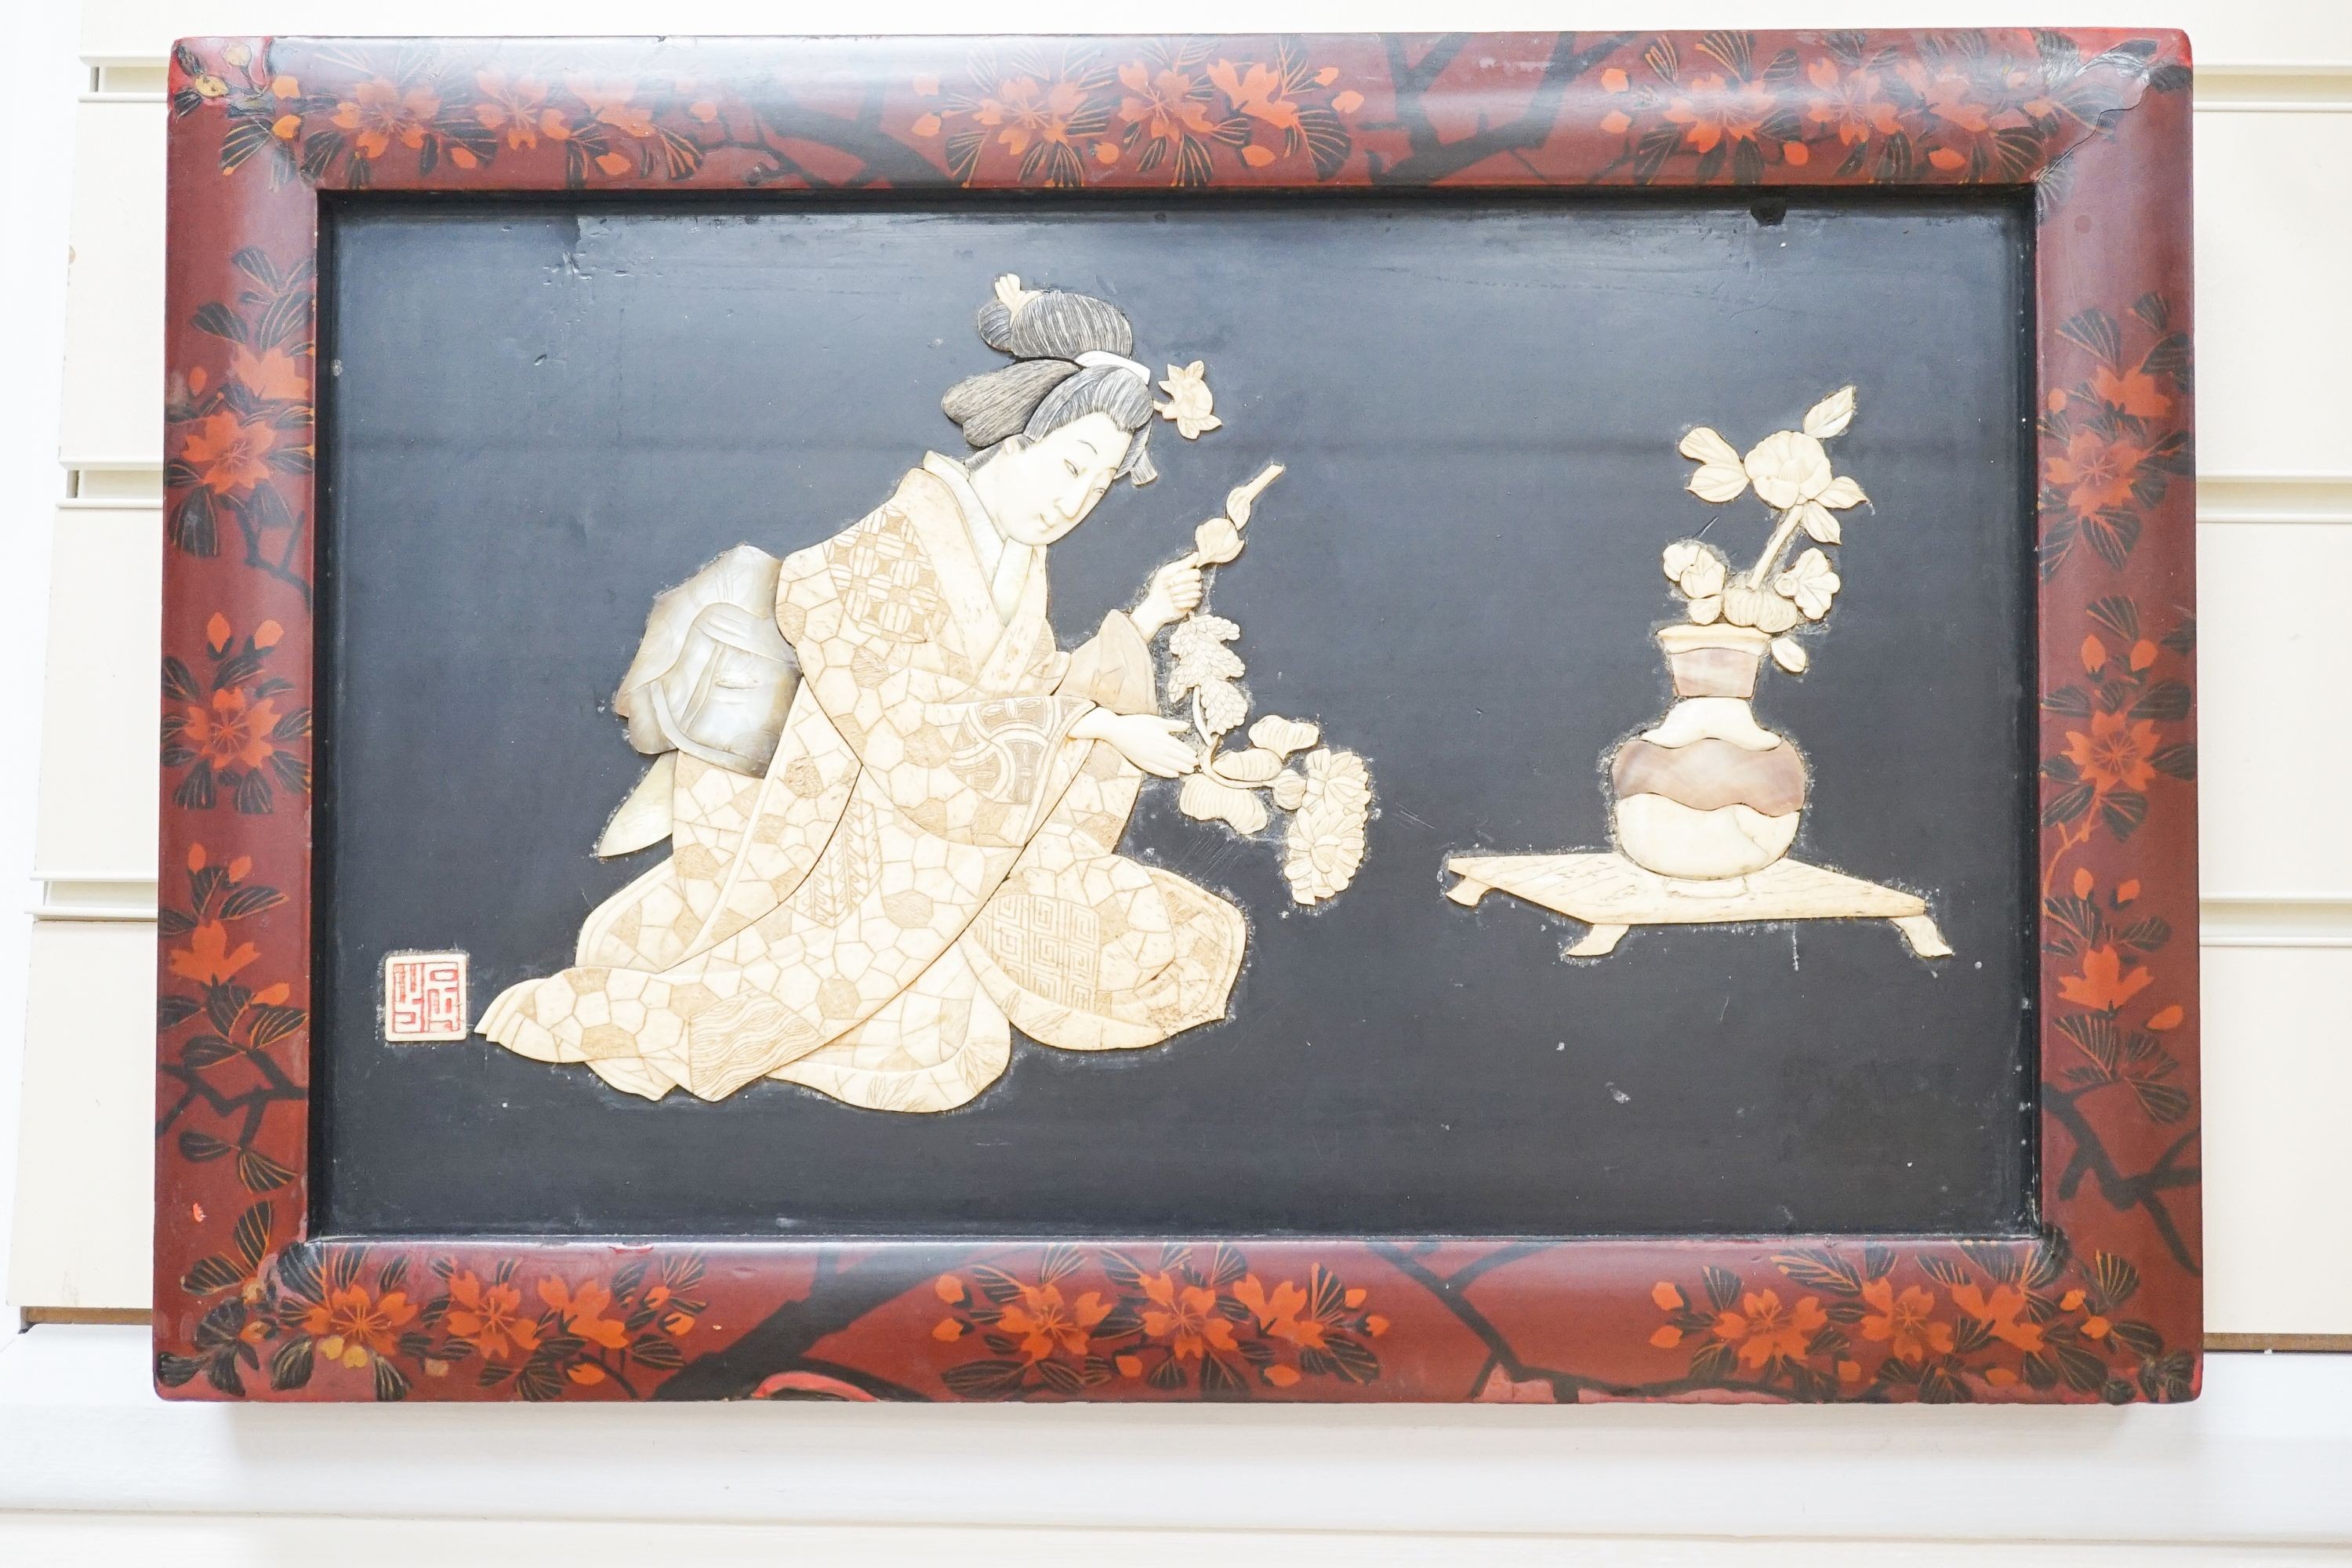 A pair of Japanese Shibayama style ivory, bone and mother of pearl inlaid lacquer panels, Meiji period, depicting two seated men, the other a bijin, 30 x 45cm